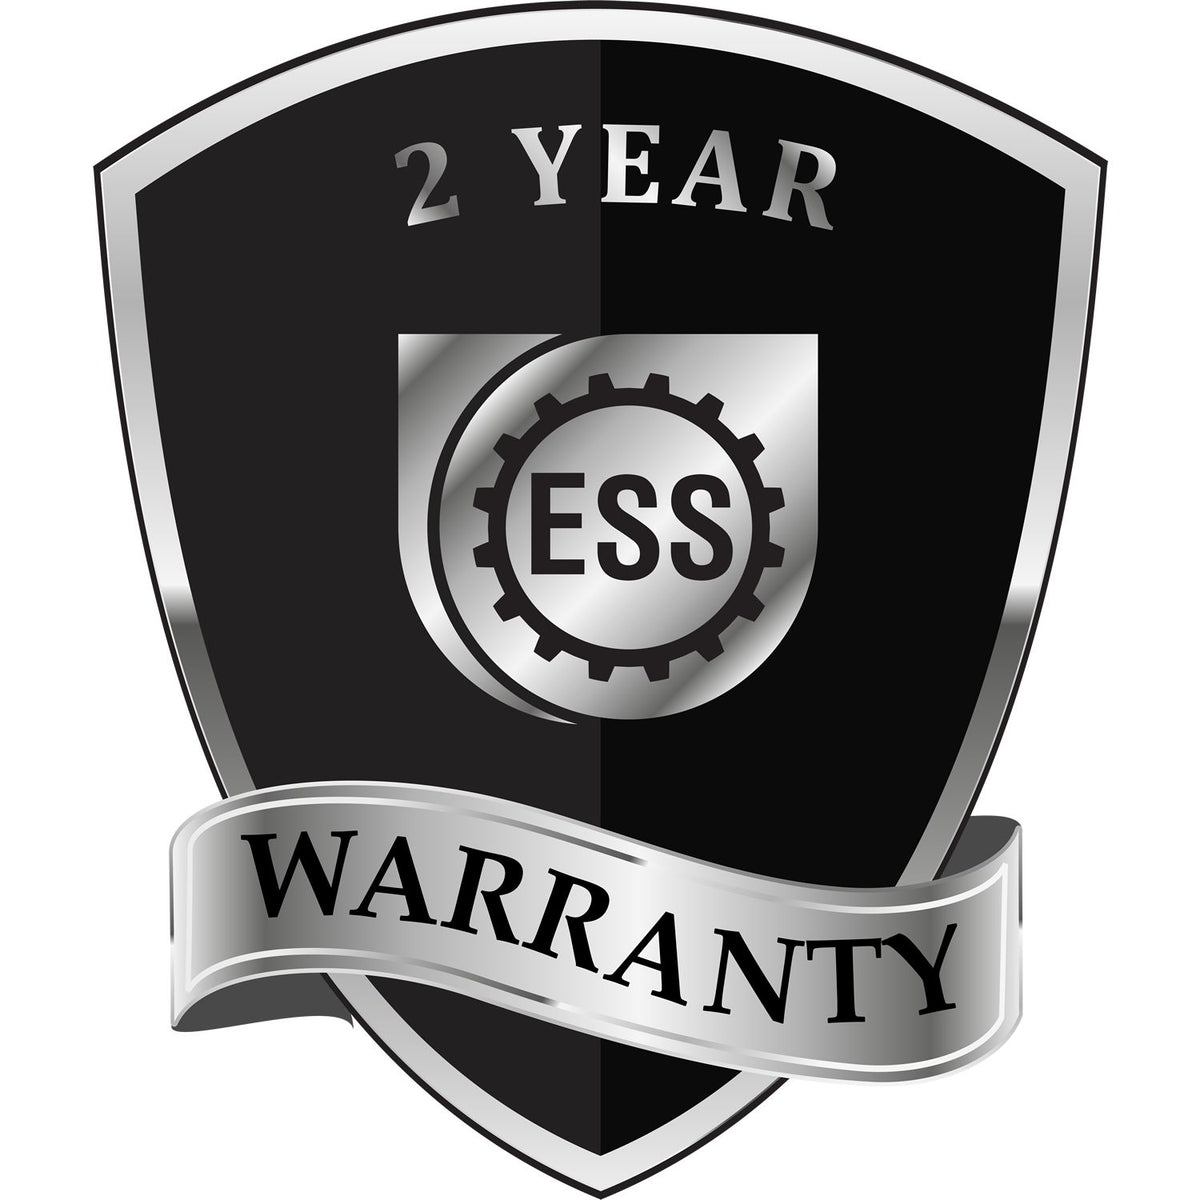 A black and silver badge or emblem showing warranty information for the Gift Maine Engineer Seal